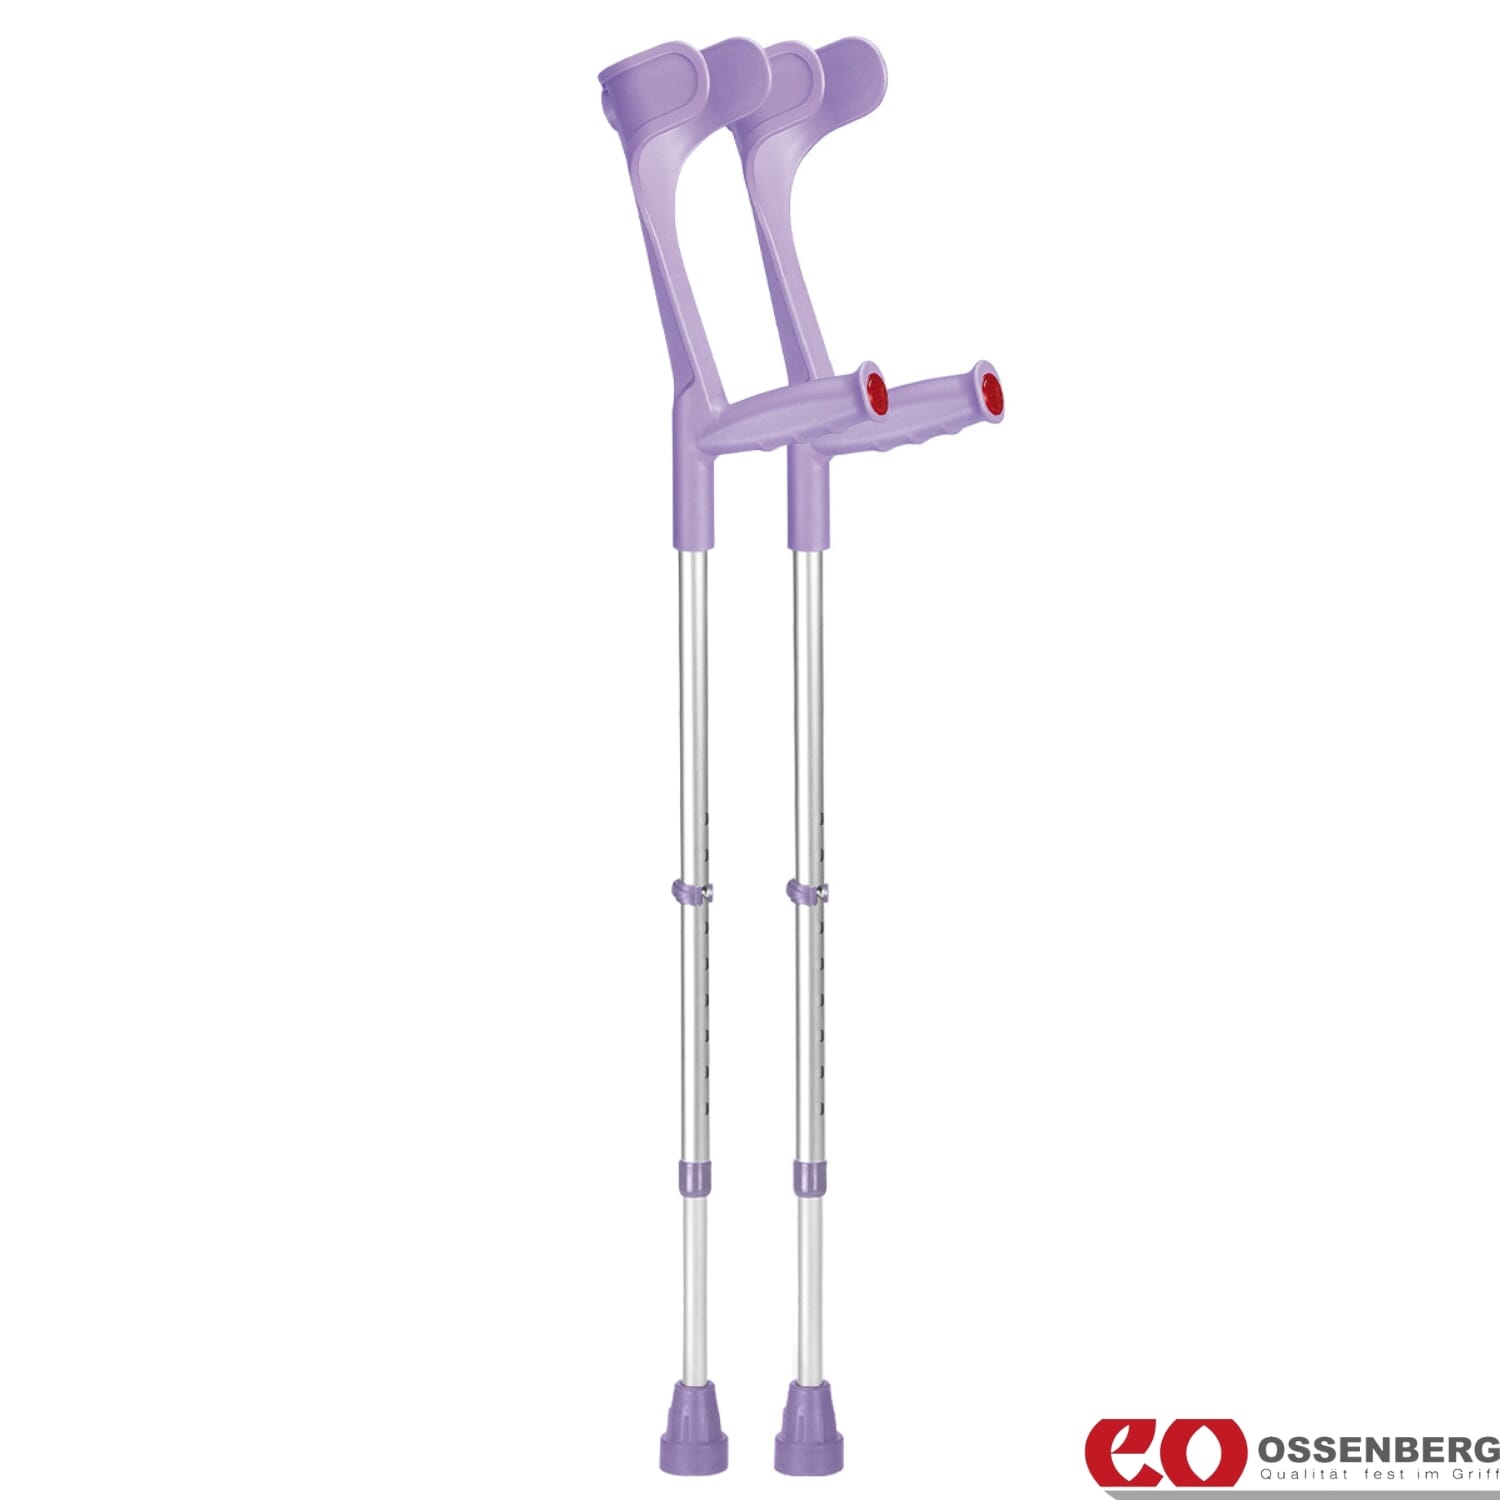 View Ossenberg Open Cuff Crutches Lilac Pair information